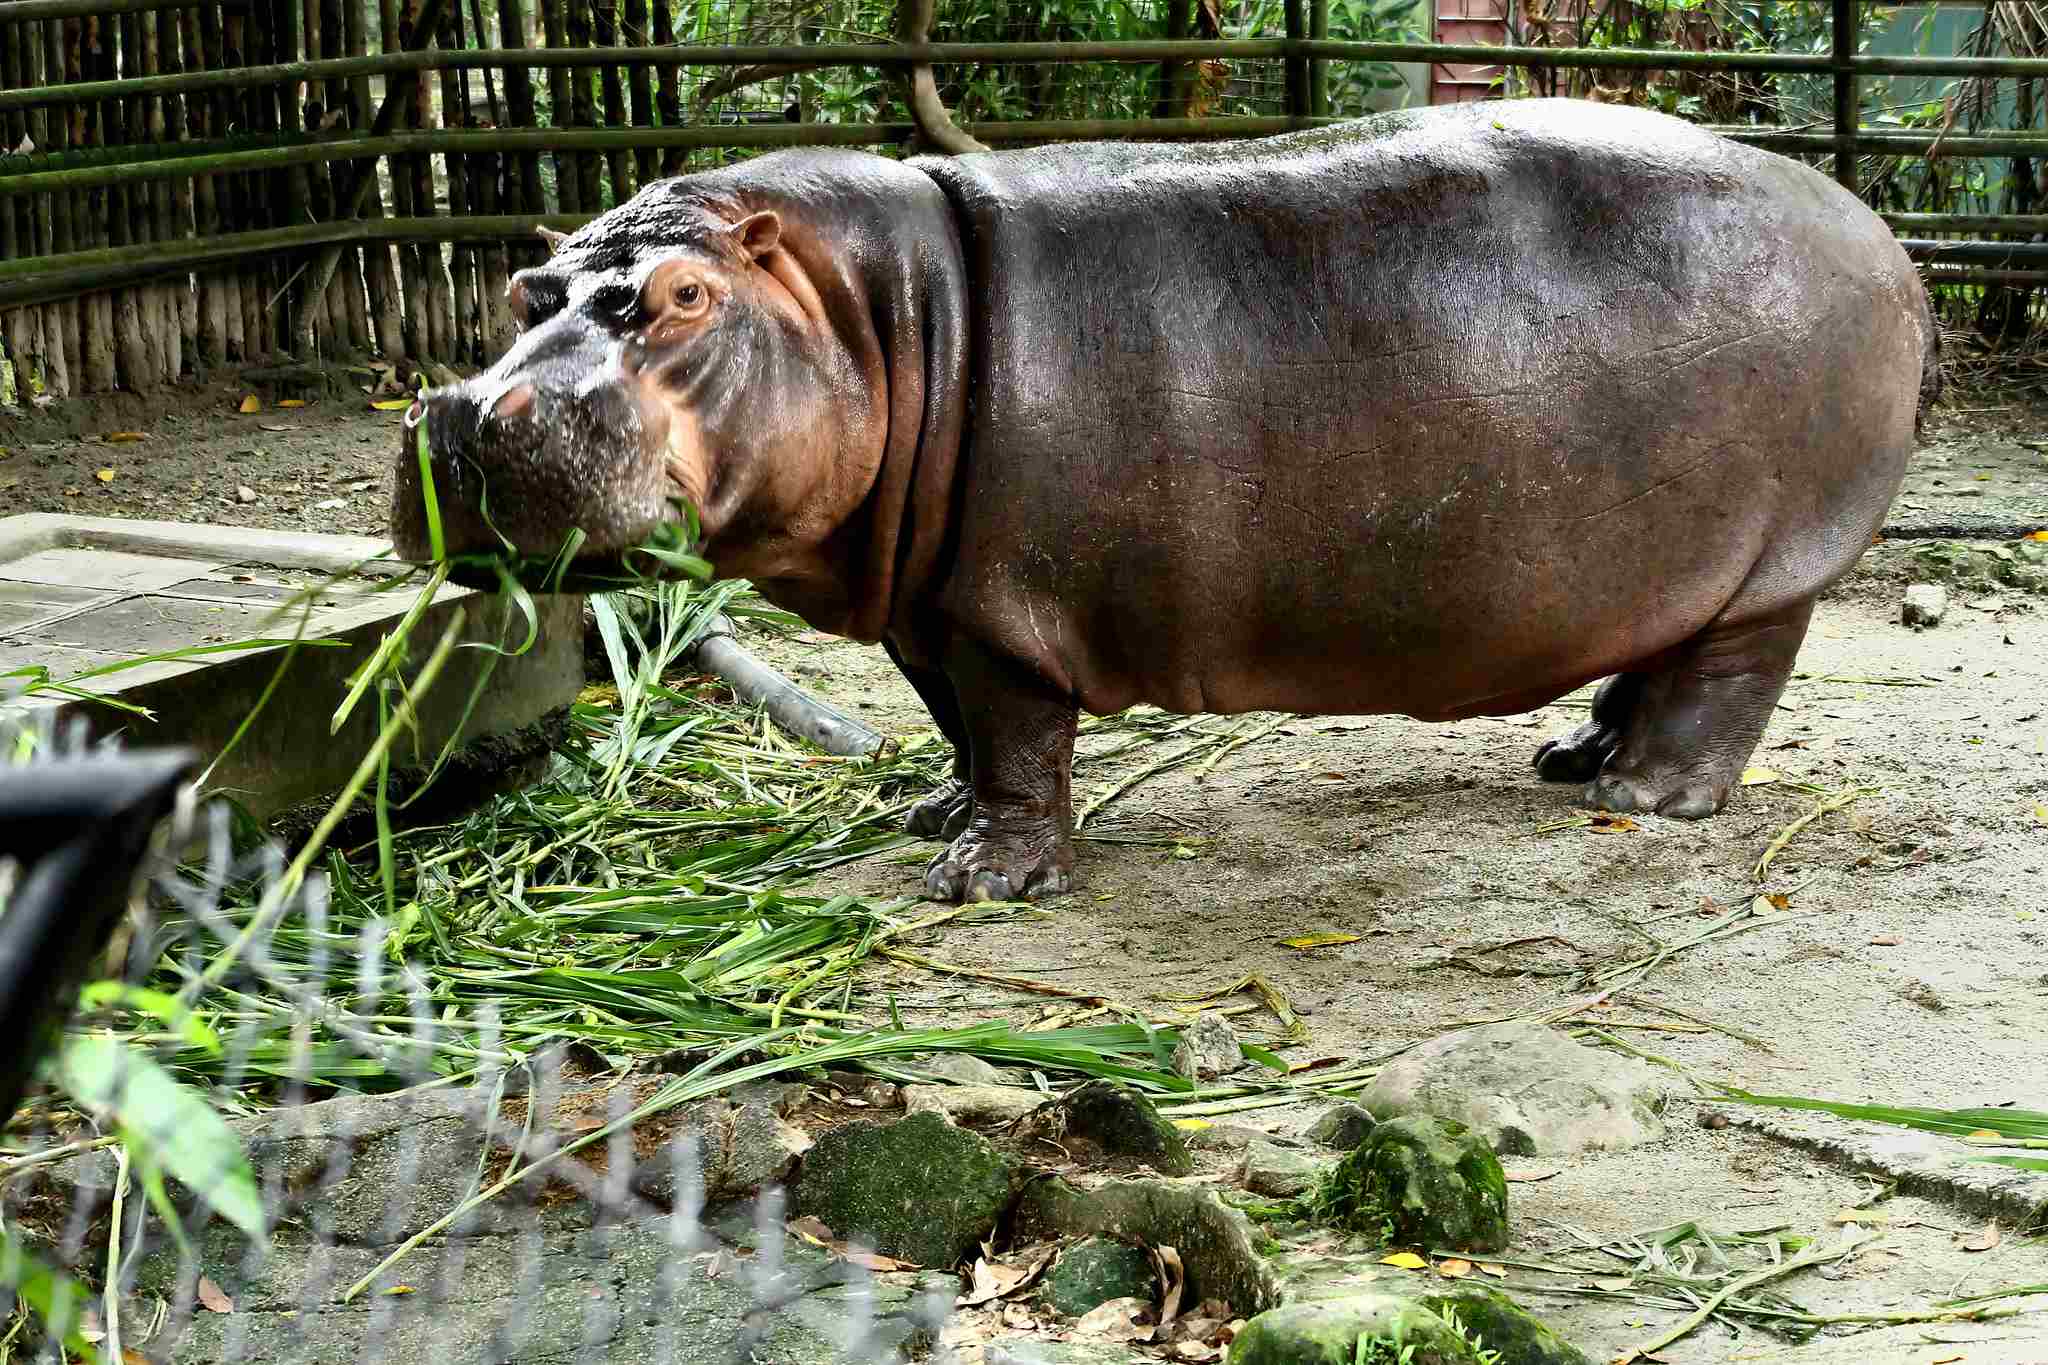 What do Hippos Eat in the Wild: Various Vegetables and Fruits Can be Fed to Hippos in Captivity (Credit: Mohd Fazlin Mohd Effendy Ooi 2012 .CC BY 2.0.)